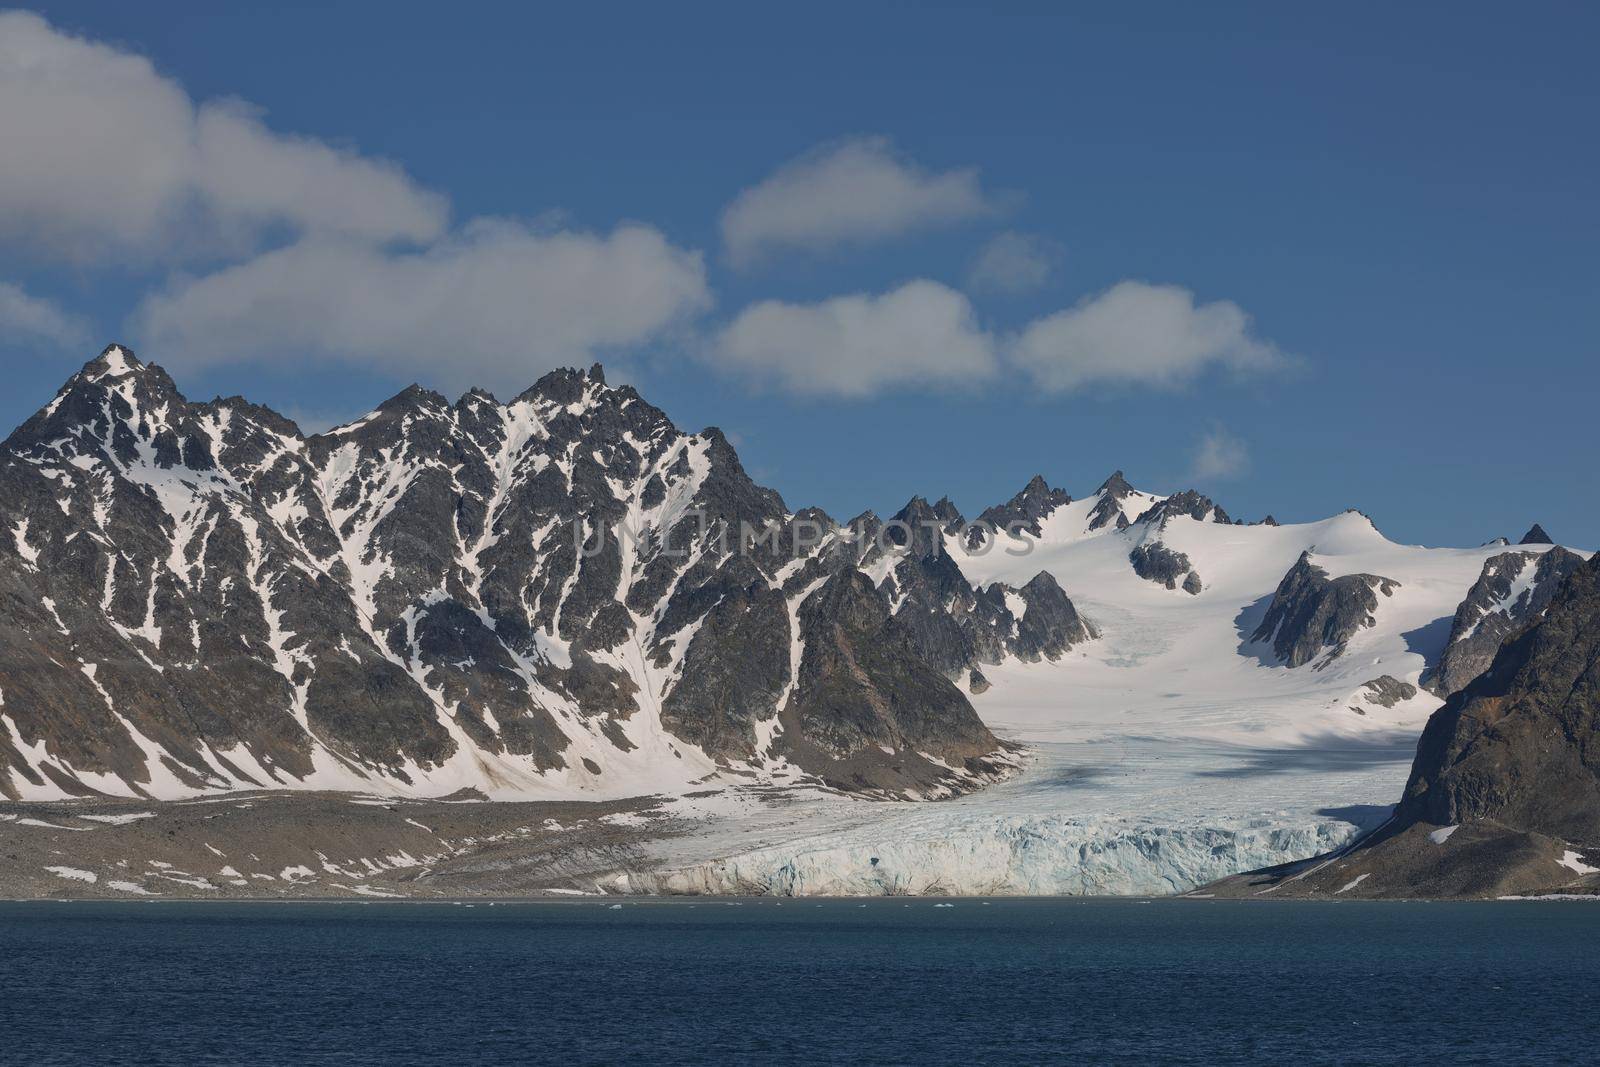 The coastline and mountains of Liefdefjord in the Svalbard Islands (Spitzbergen) in the high Arctic by wondry